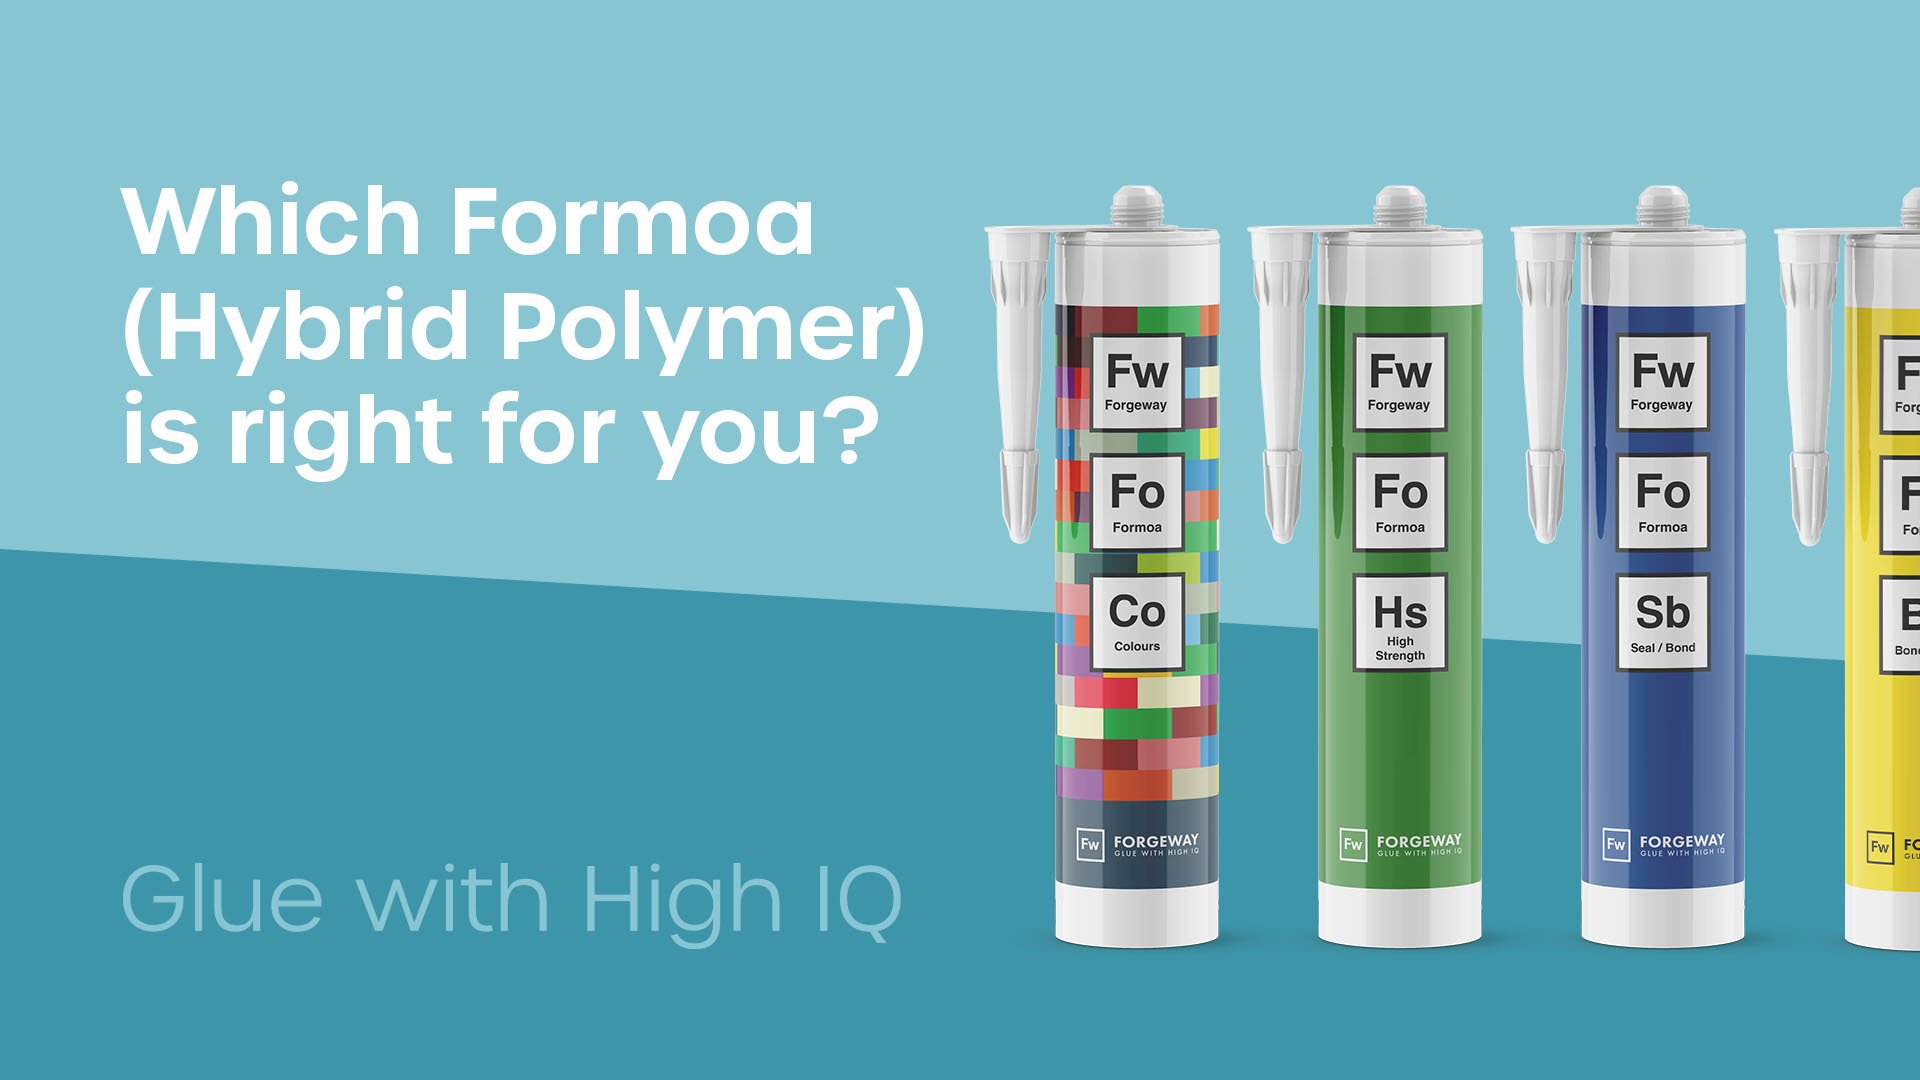 Choosing the right Formoa for you